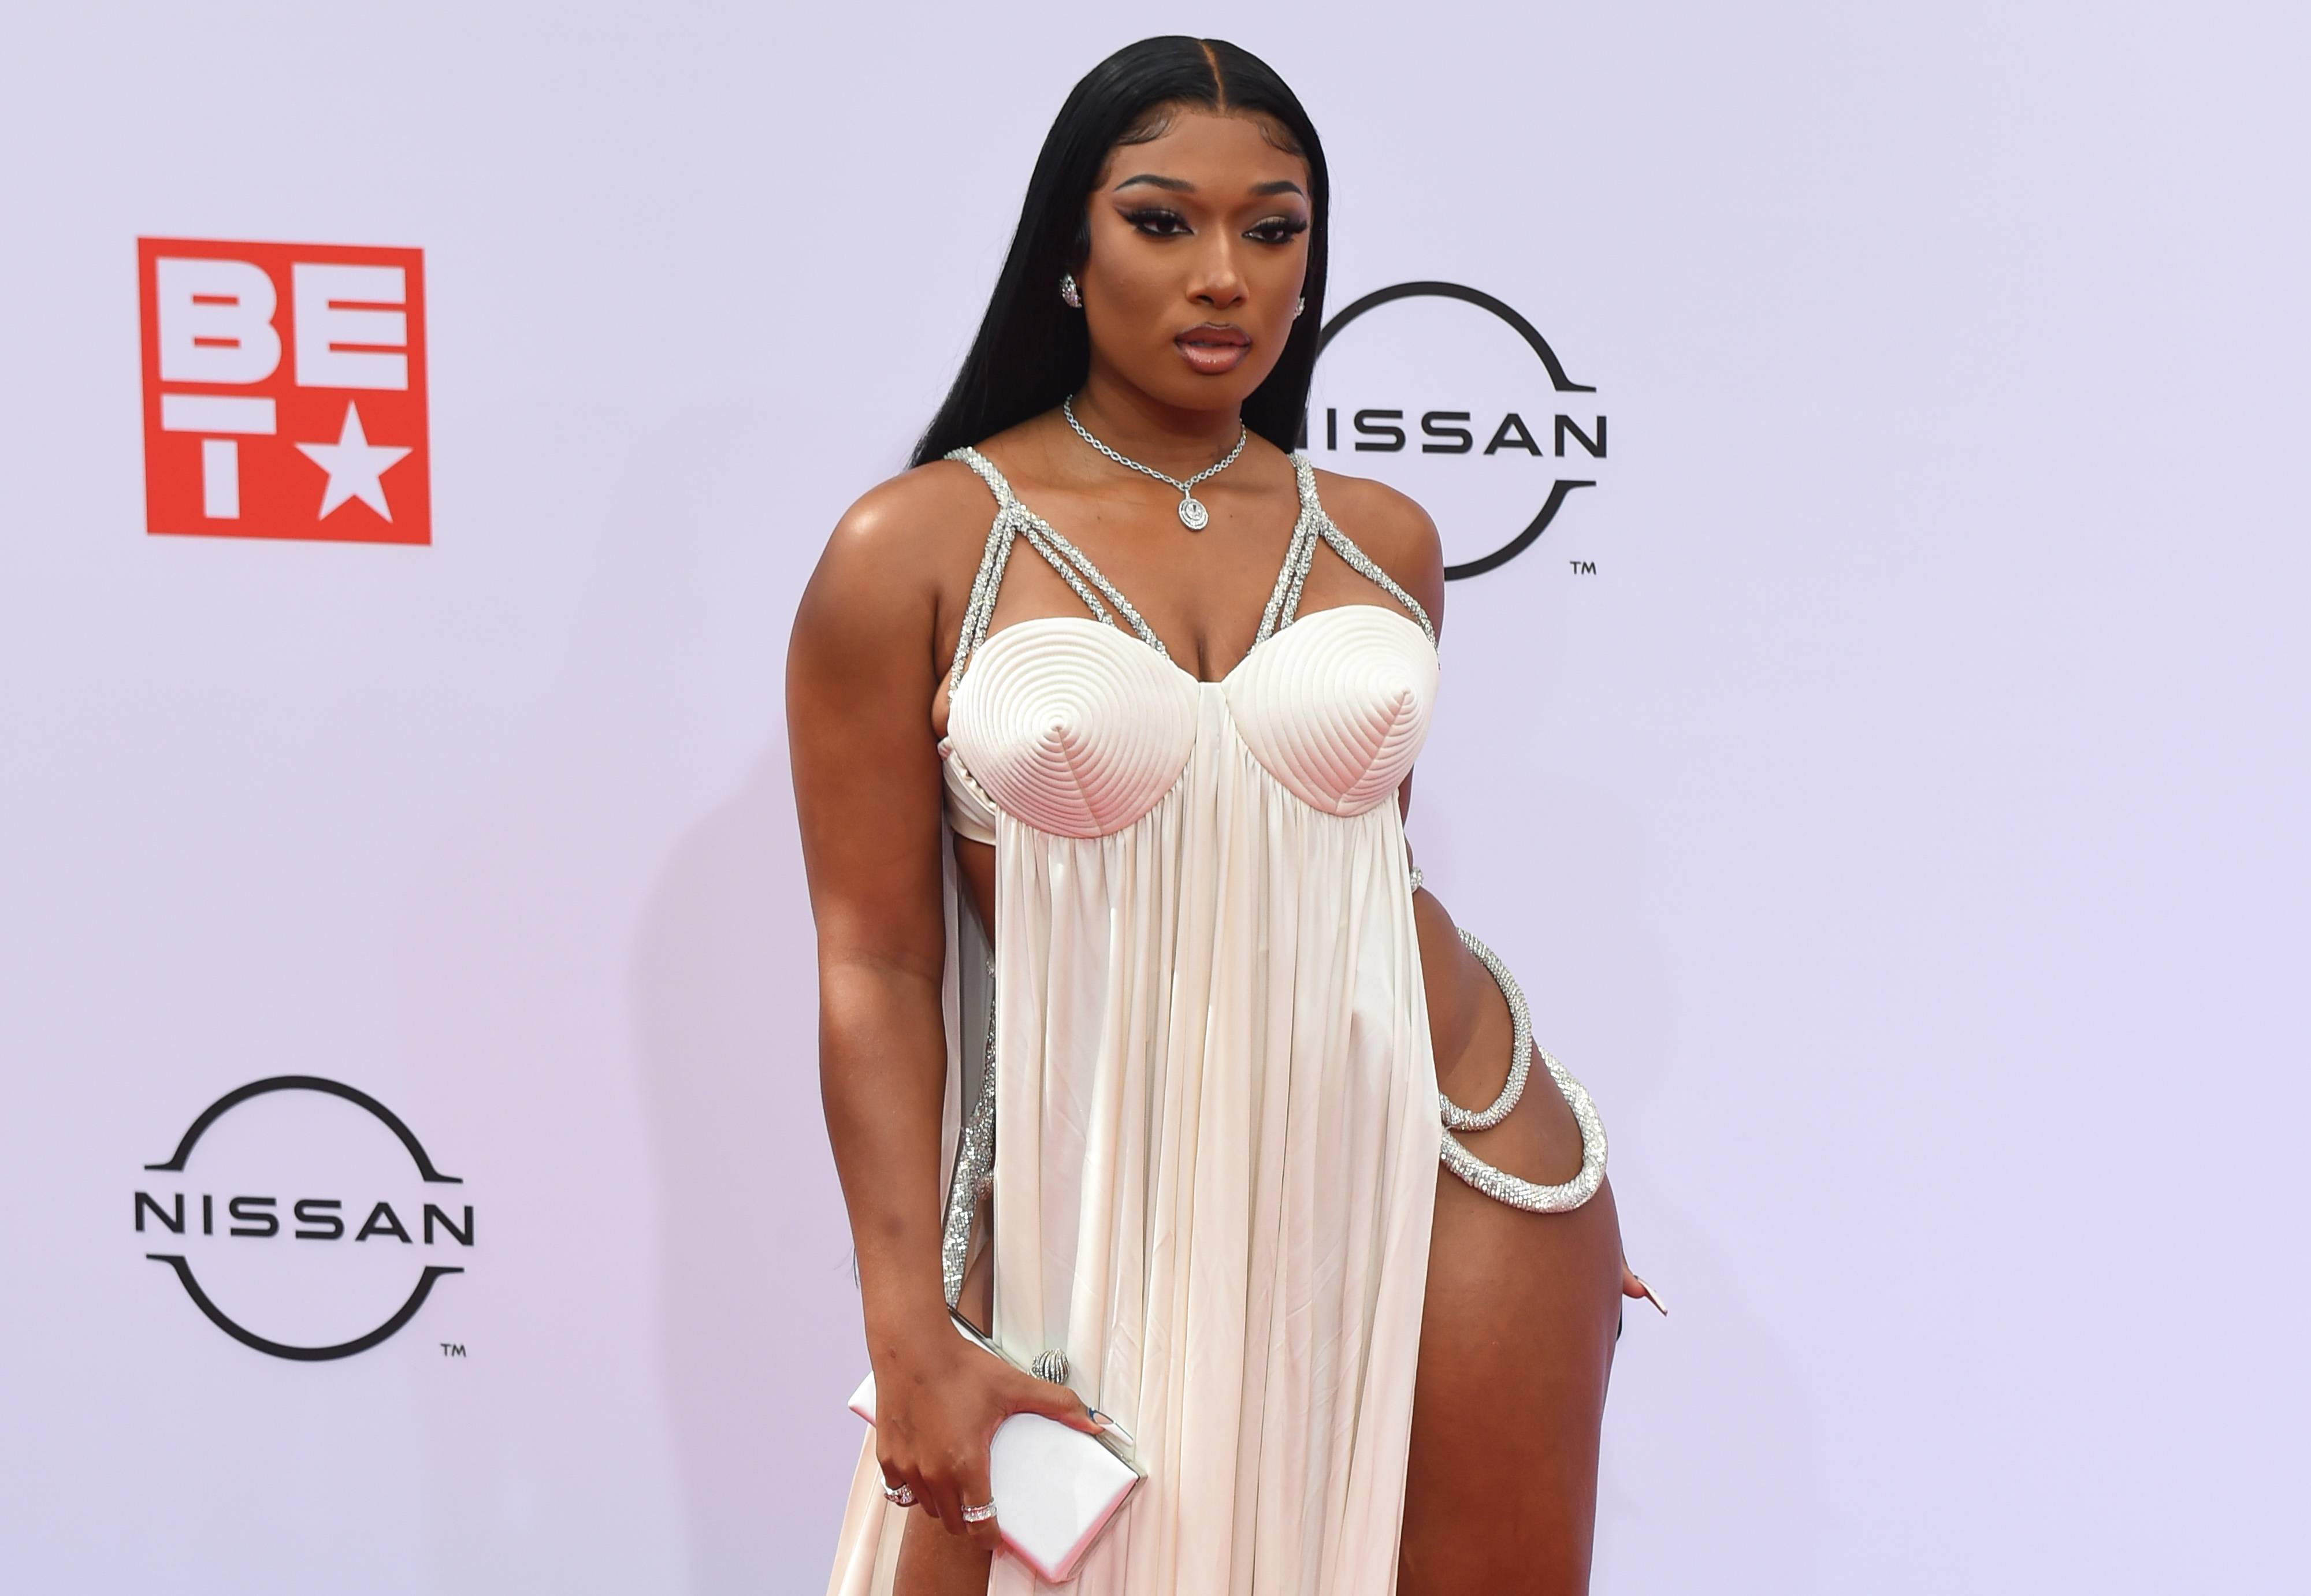 LOS ANGELES, CALIFORNIA - JUNE 27: Recording Artist Megan Thee Stallion attends the 2021 BET Awards at the Microsoft Theater on June 27, 2021 in Los Angeles, California. (Photo by Aaron J. Thornton/Getty Images)